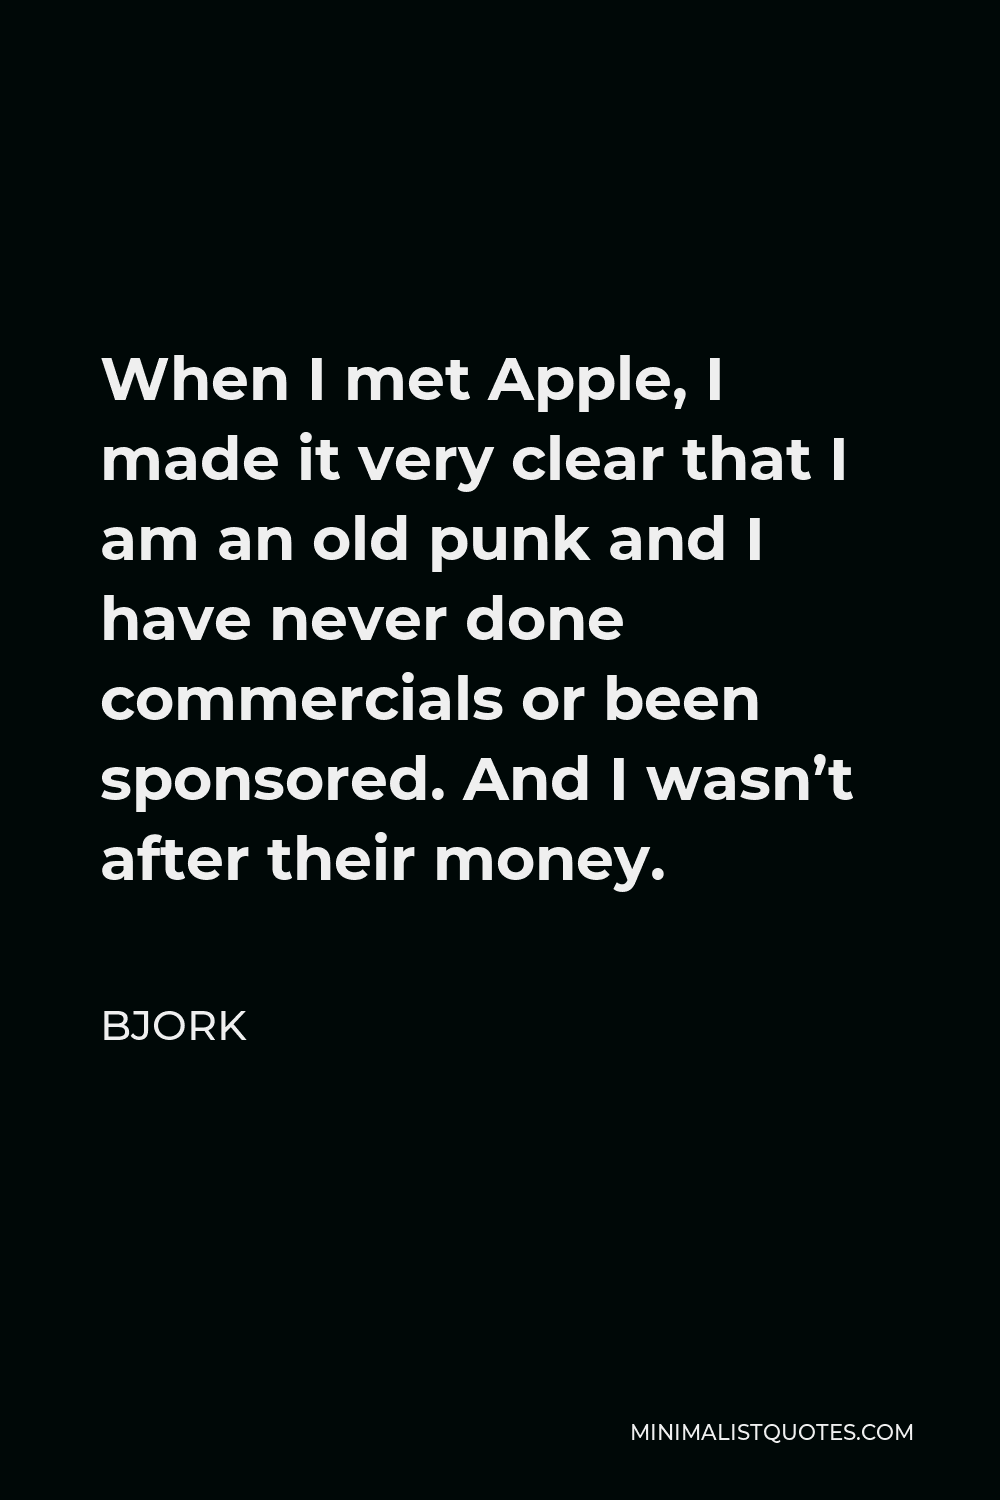 Bjork Quote - When I met Apple, I made it very clear that I am an old punk and I have never done commercials or been sponsored. And I wasn’t after their money.